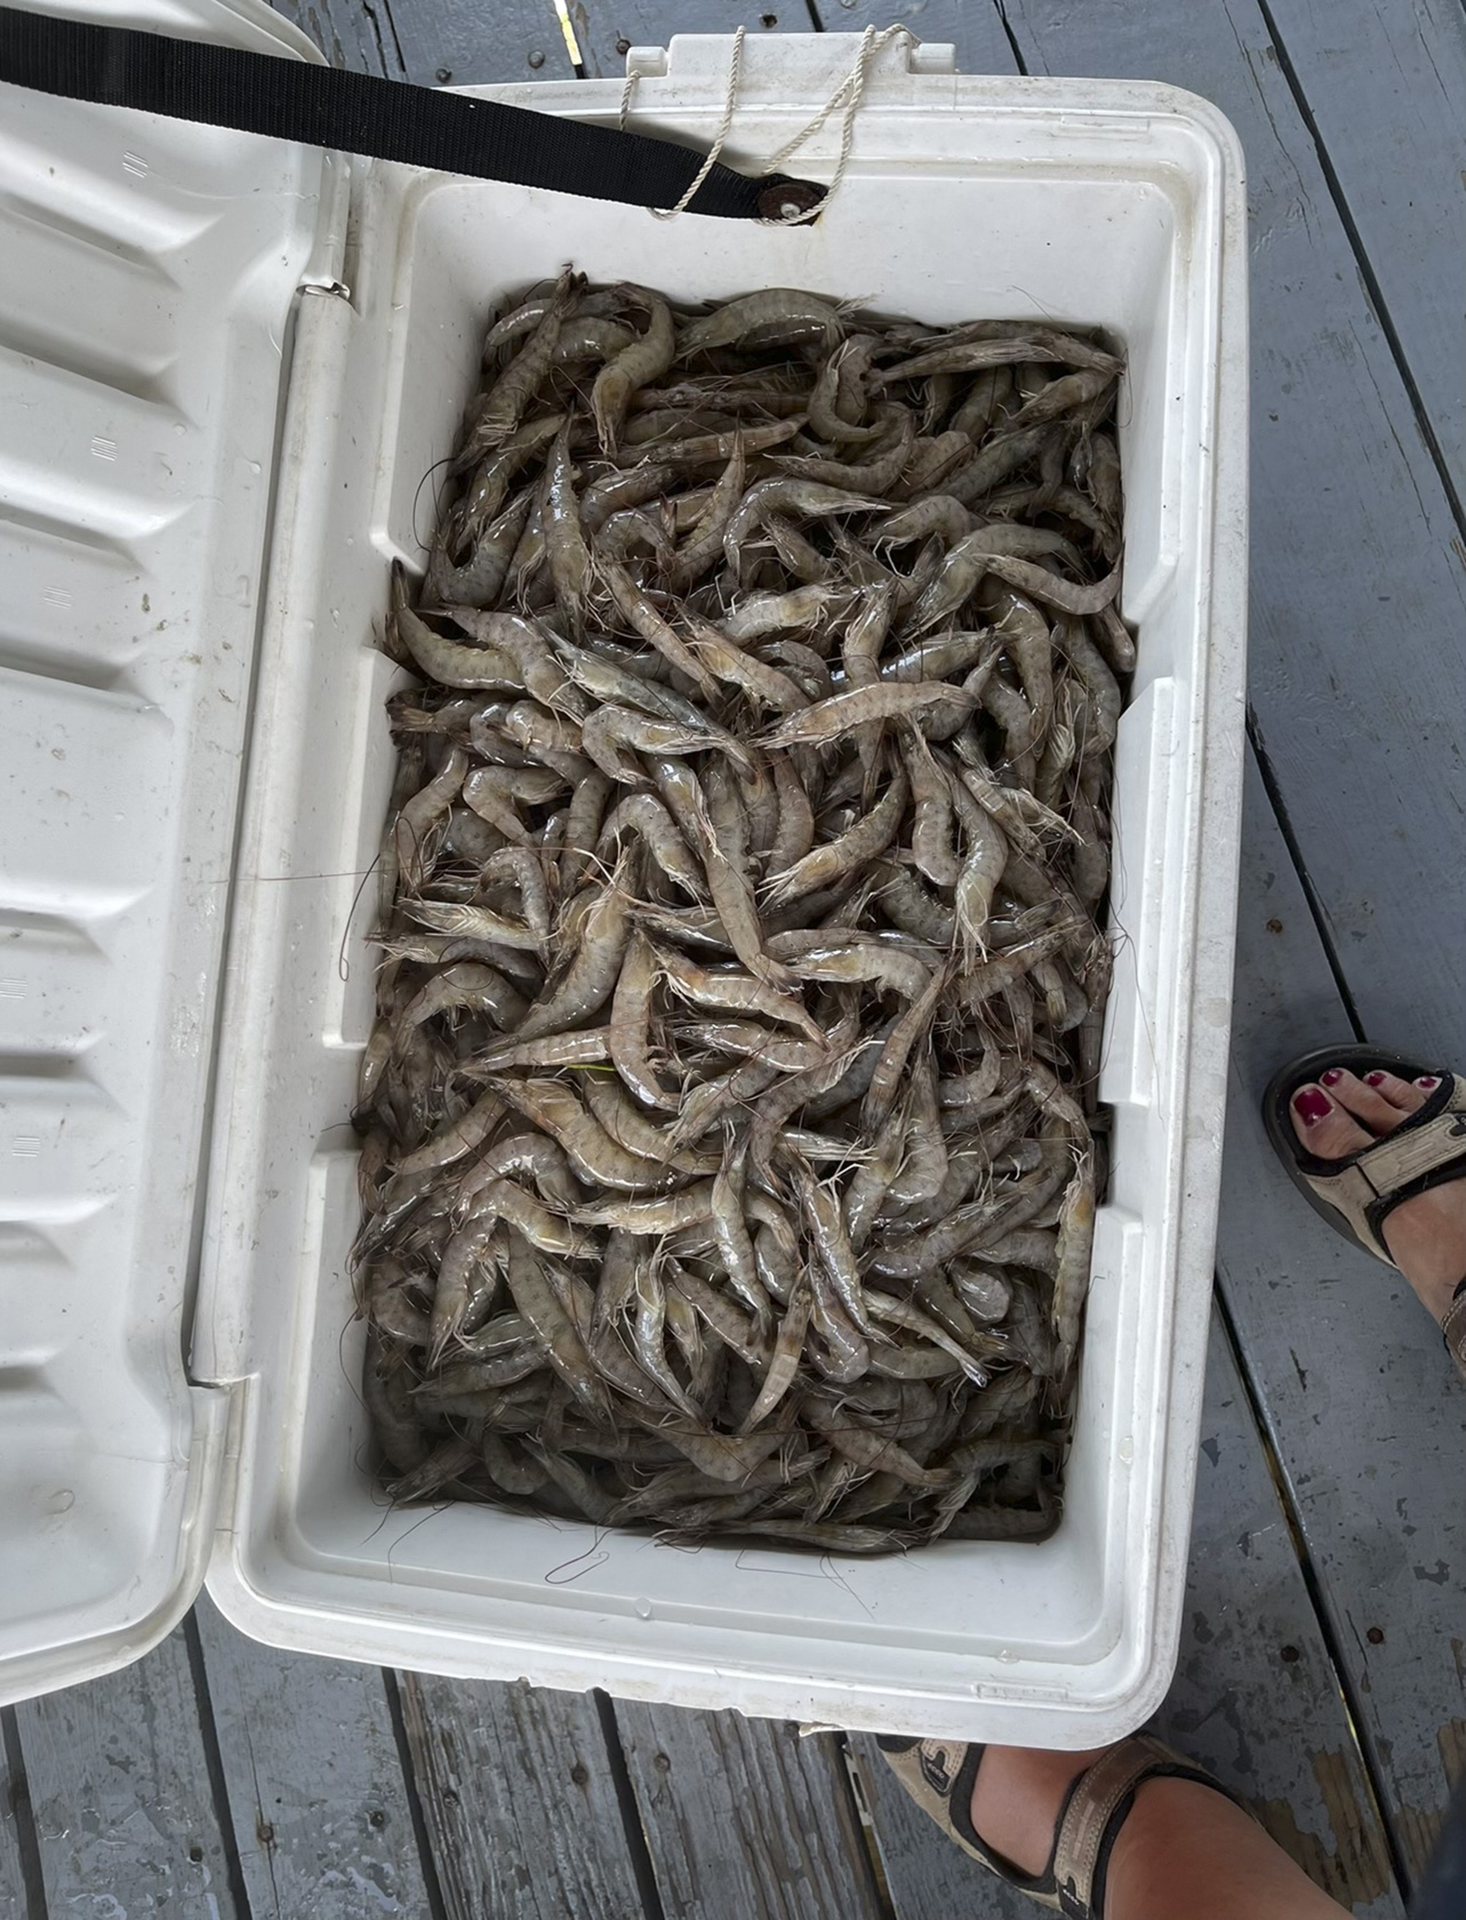 Shrimp in a cooler, after being caught in Louisiana.